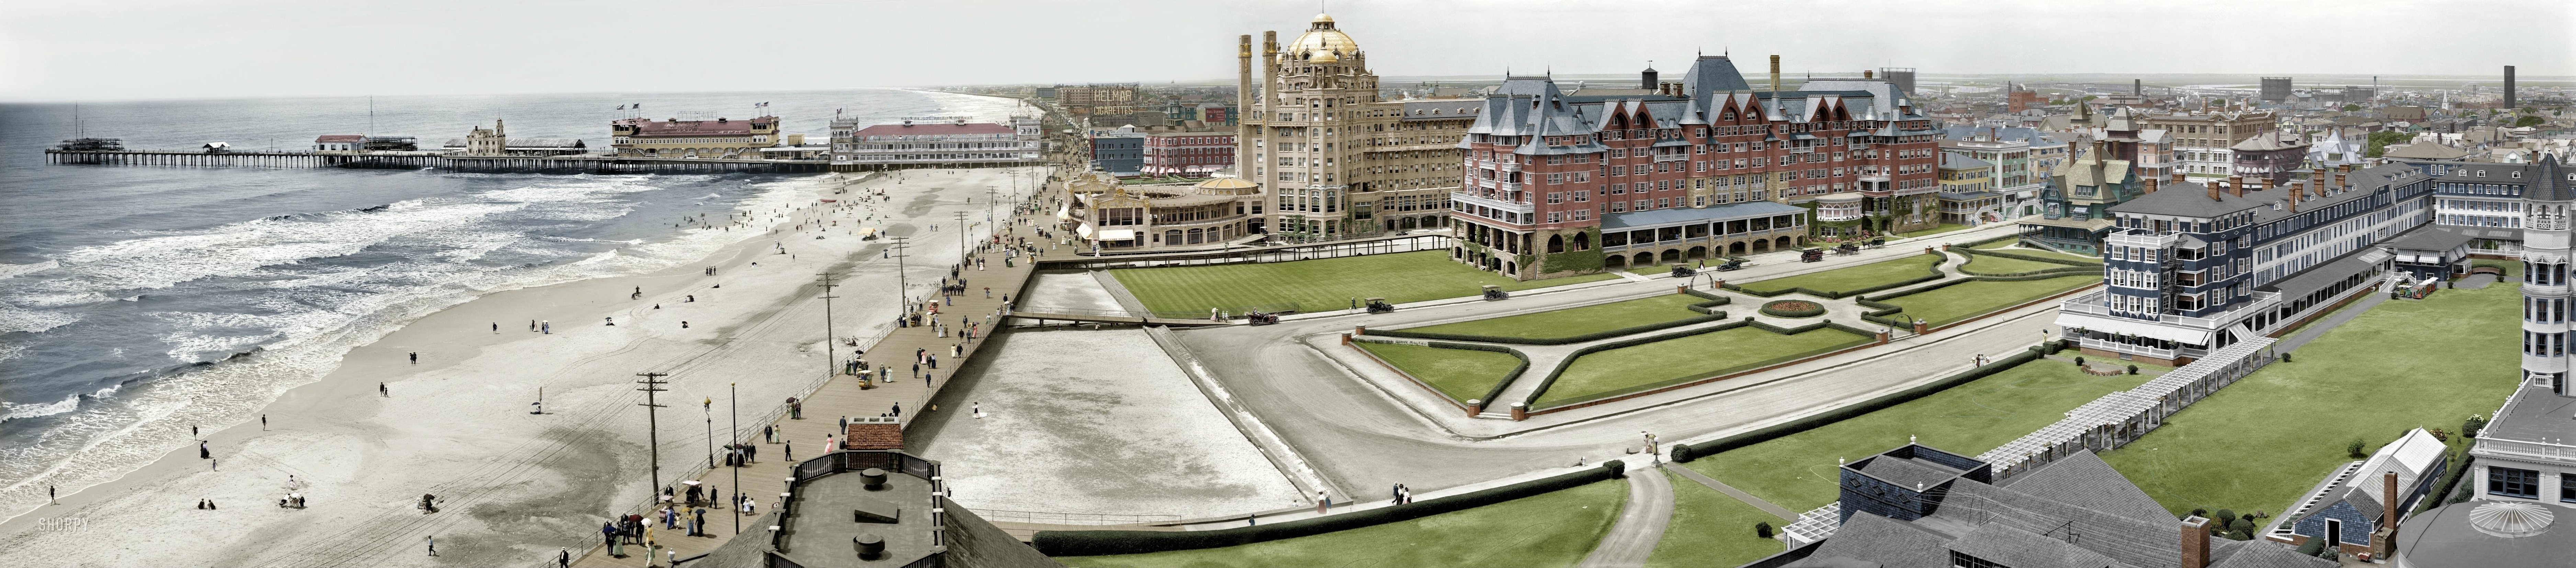 Atlantic City, N.J., circa 1910. "Boardwalk, Hotel Marlborough-Blenheim and Young's Million-Dollar Pier." 

Dave posted this amazing black-and-white panorama in October.  Someone in the comments section suggested that colorizing this photo would be a "Monumental Challenge." I couldn't resist giving it a try. View full size.